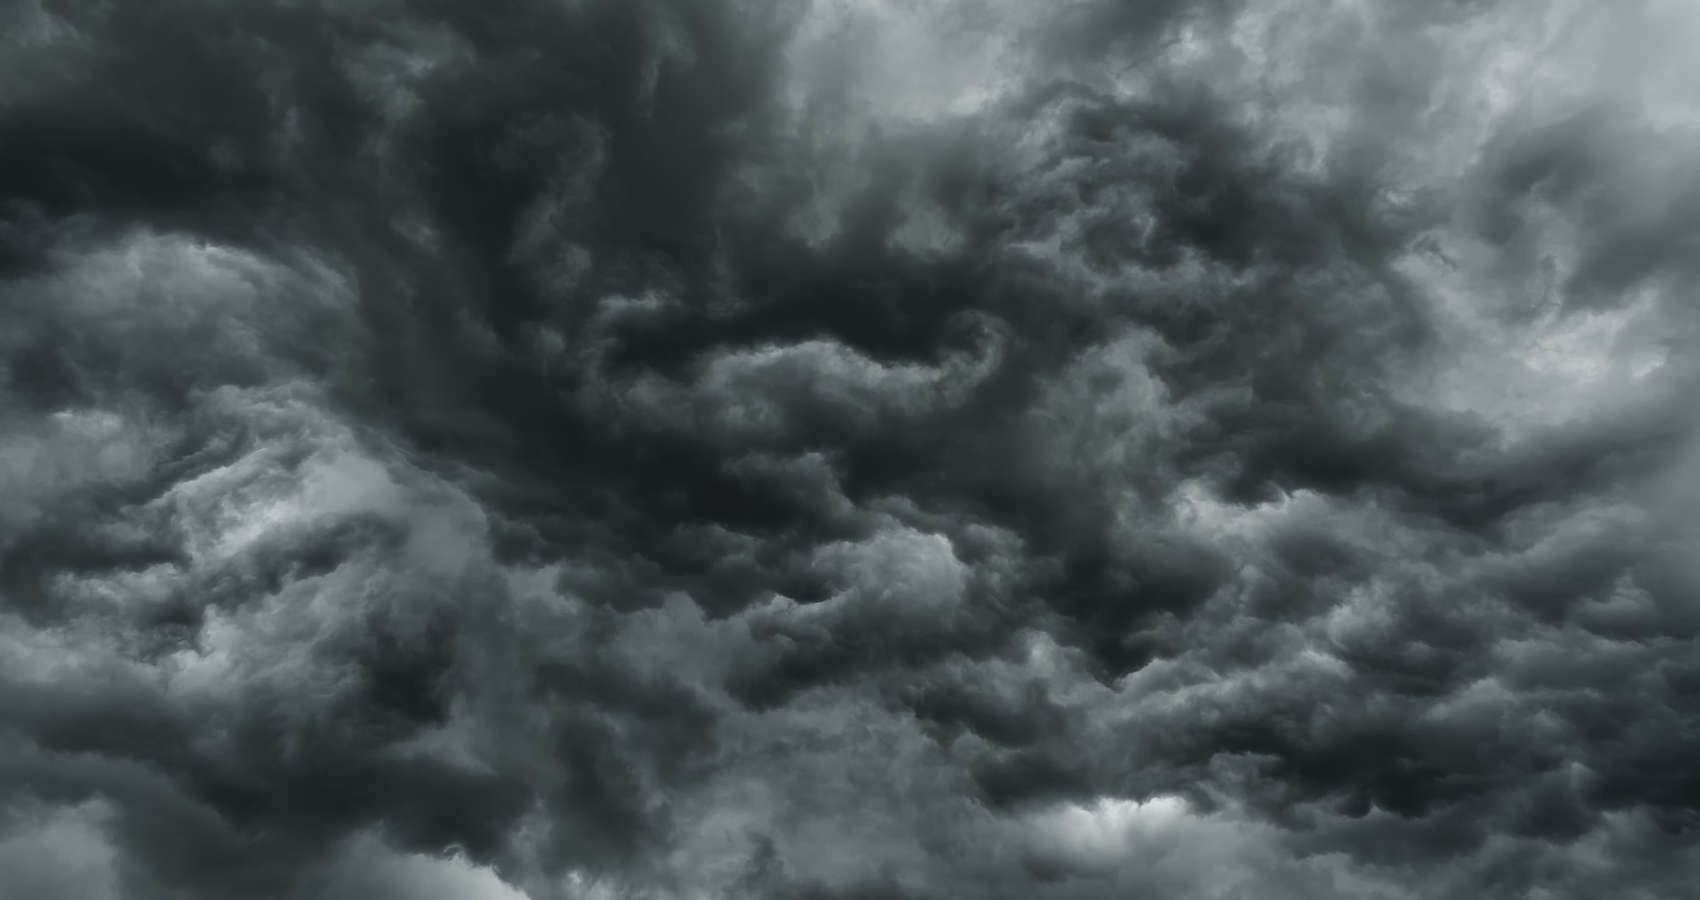 First Storm After Returning To The South, poetry by Karen Southall Watts at Spillwords.com